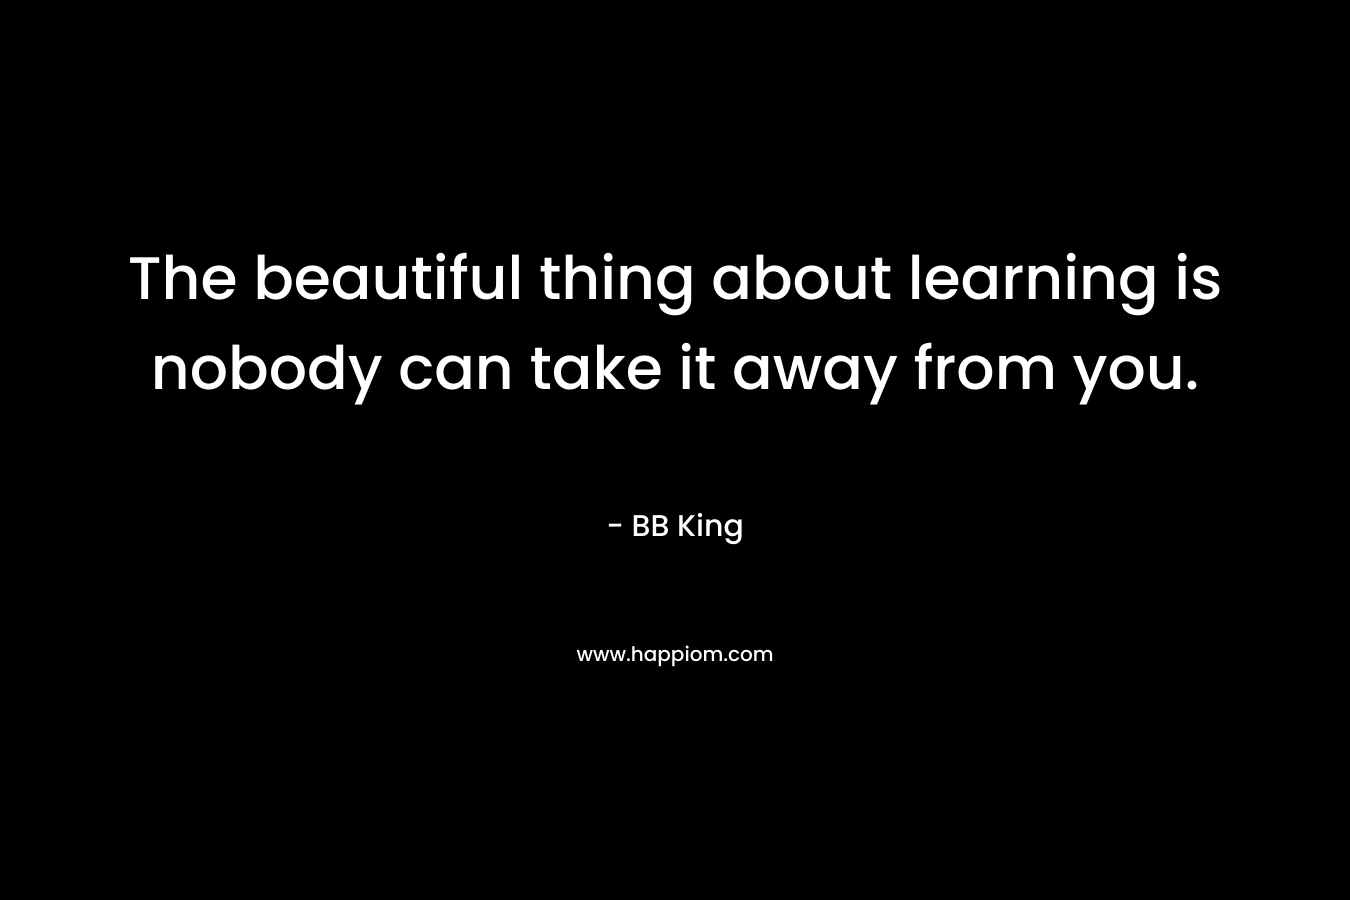 The beautiful thing about learning is nobody can take it away from you. – BB King